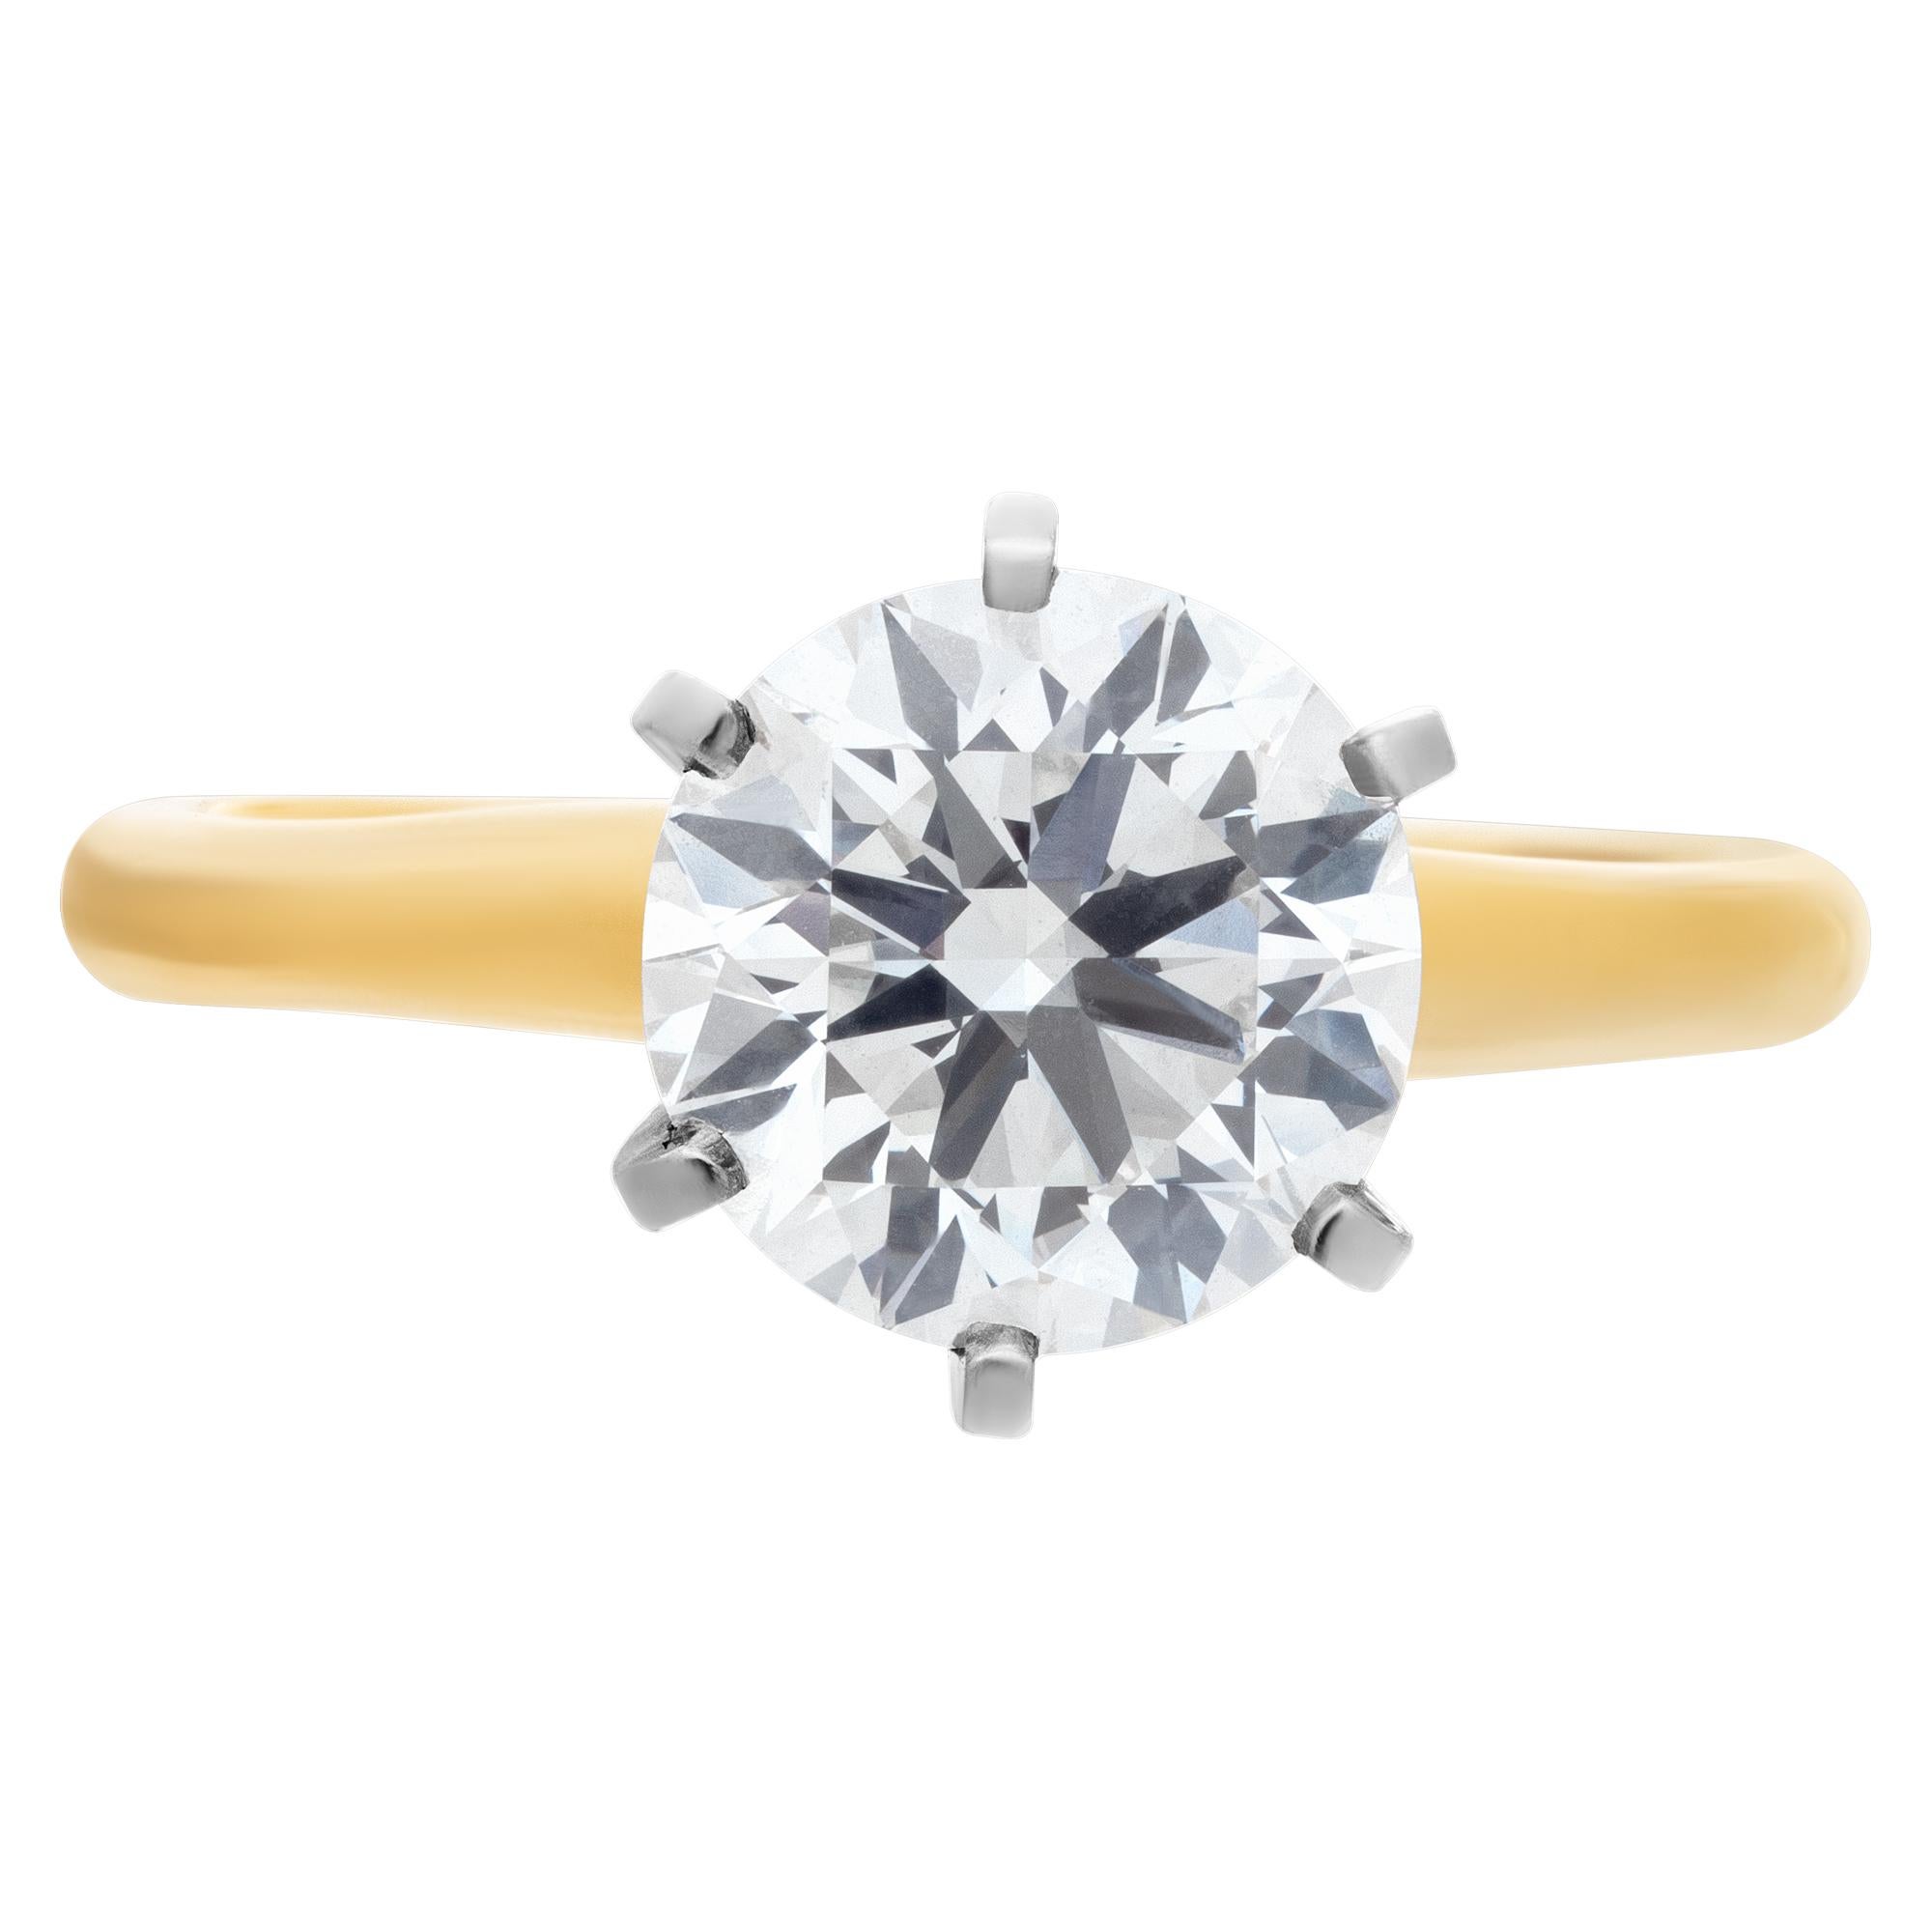 GIA certified round brilliant cut diamond 2.02 carat (G color, VVS2 clarity) solitaire ring set in 14k yellow gold setting with white gold 6 prongs. Size 6

This GIA certified ring is currently size 6 and some items can be sized up or down, please